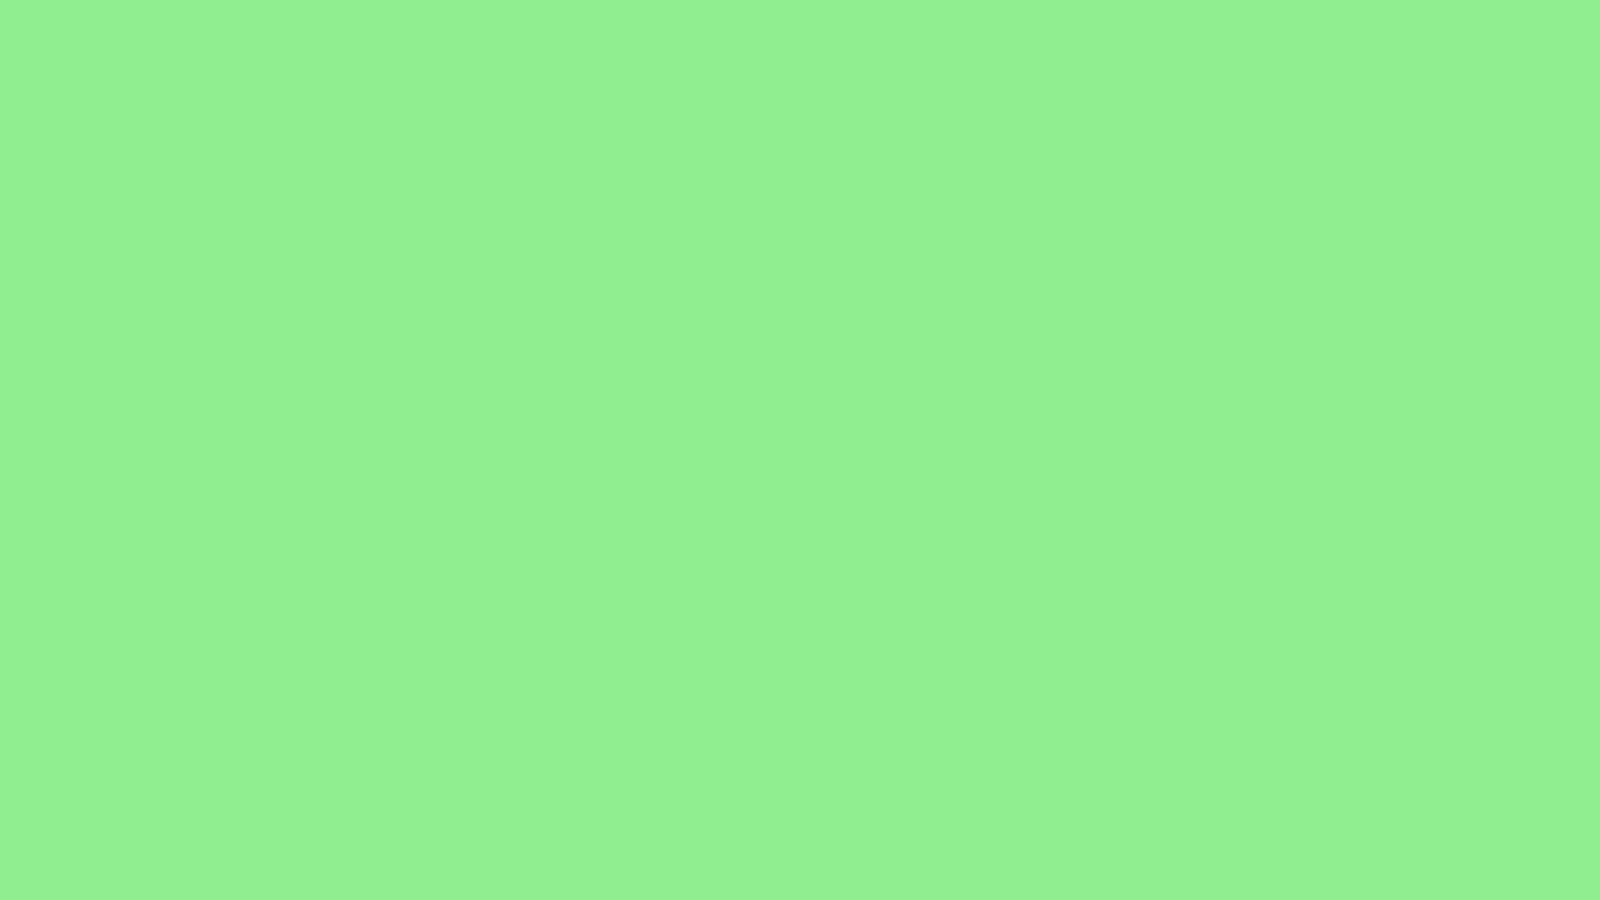 Free 1600x900 resolution Light Green solid color background view and